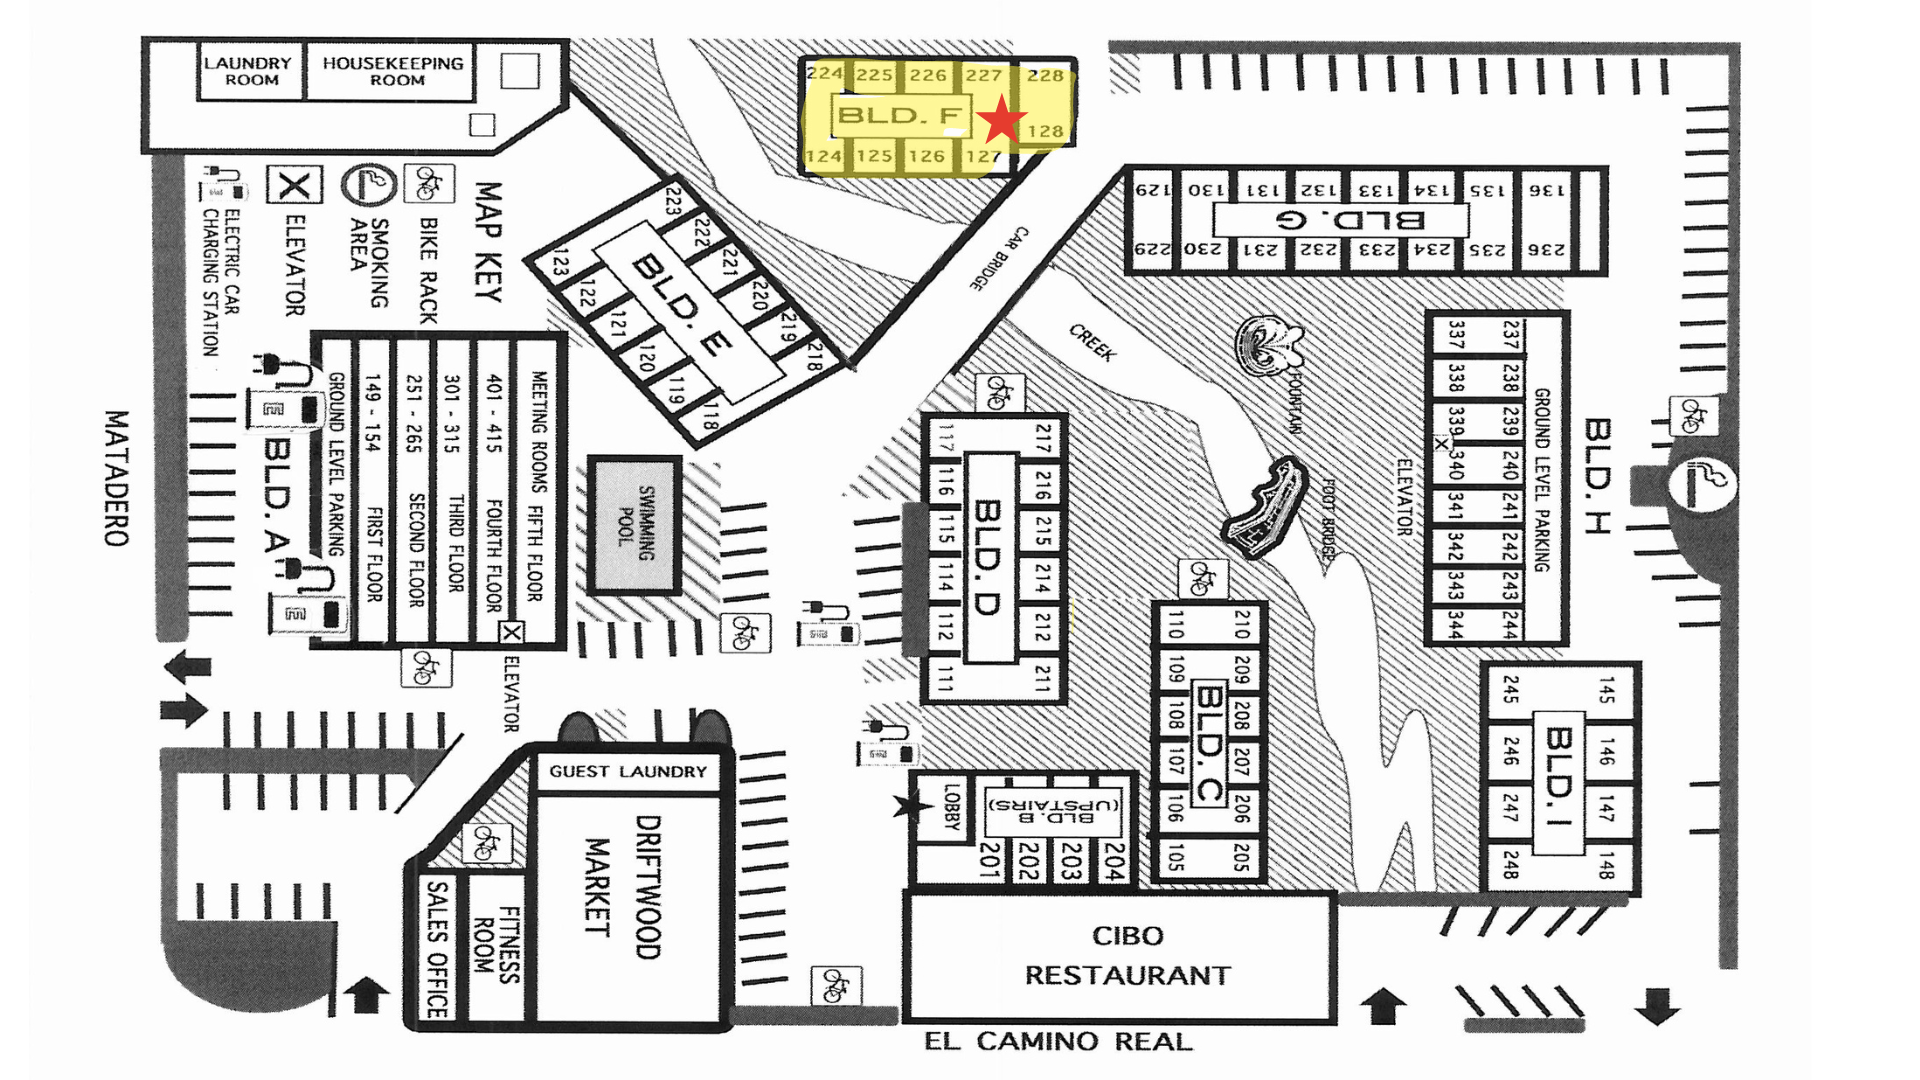 Hotel Map with Building F Highlighted